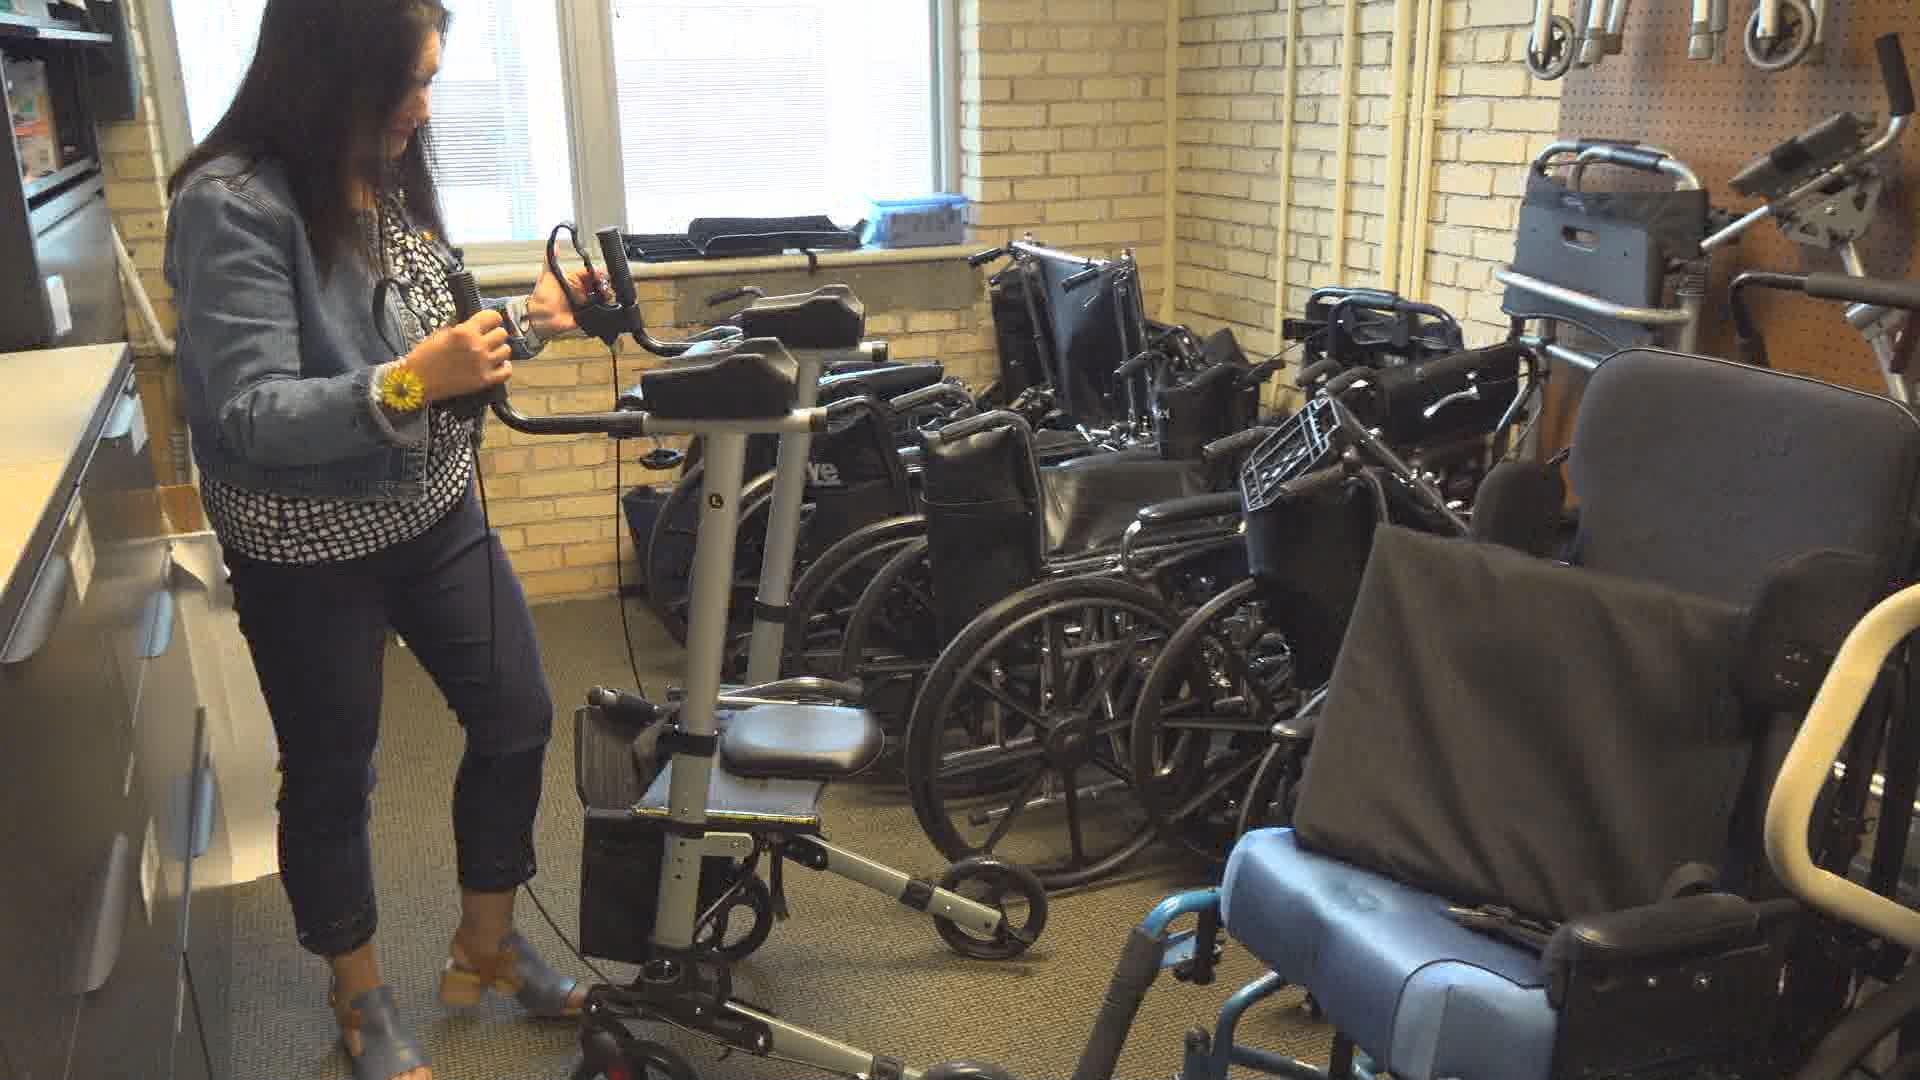 Renew Mobility is holding its first-ever “Equipment for Wellness Event” on Friday, providing mobility equipment like wheelchairs, canes and walkers for free.